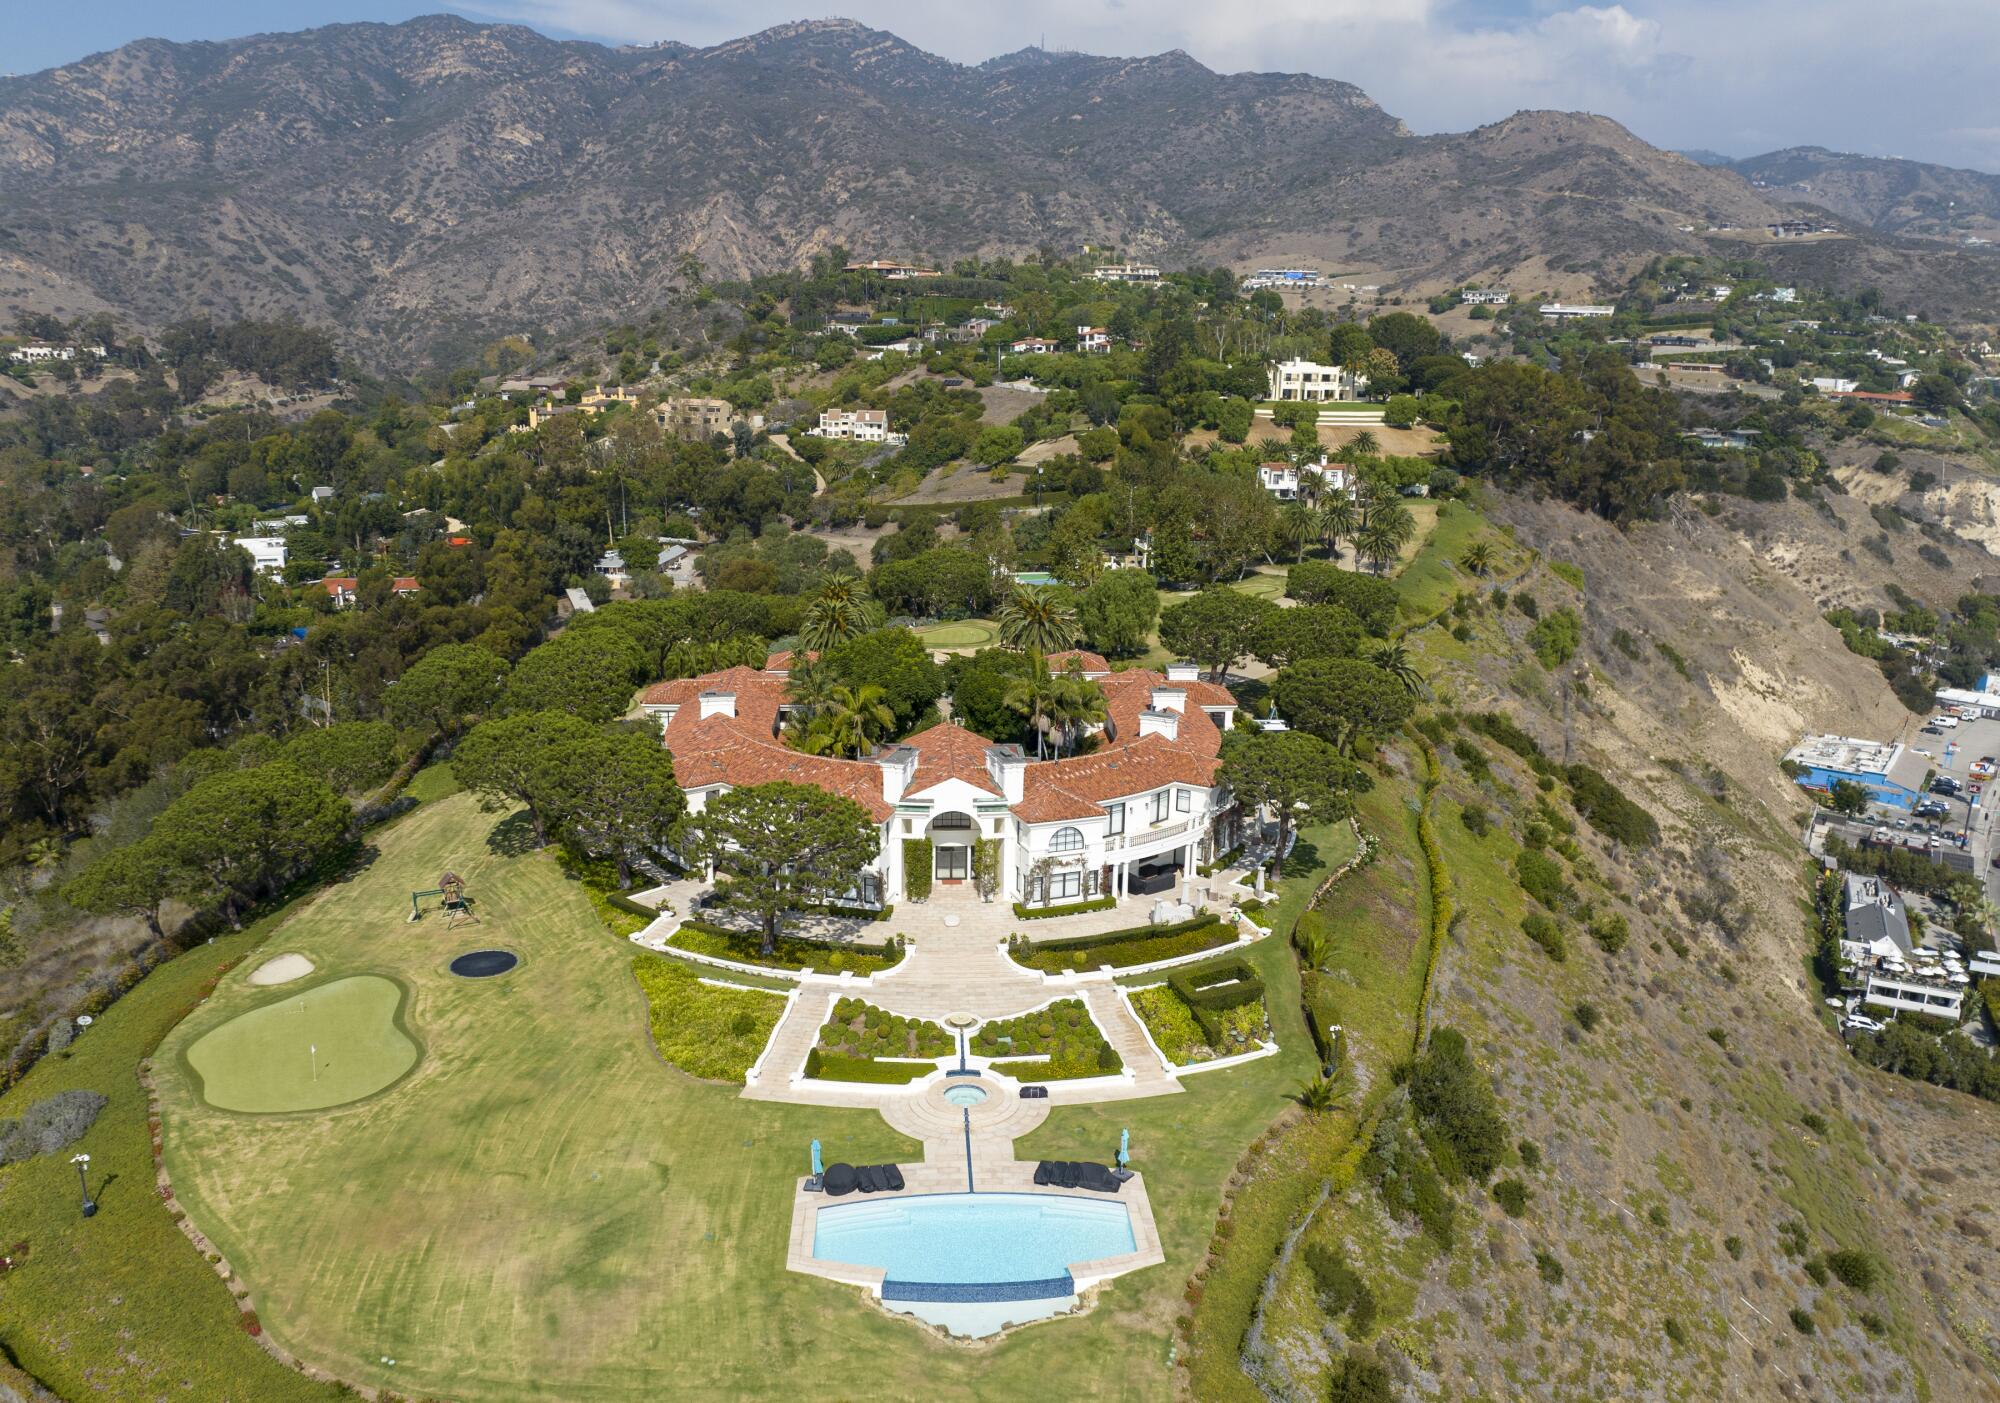 An aerial view of the disputed property, at 3620 Sweetwater Mesa Road in Malibu.